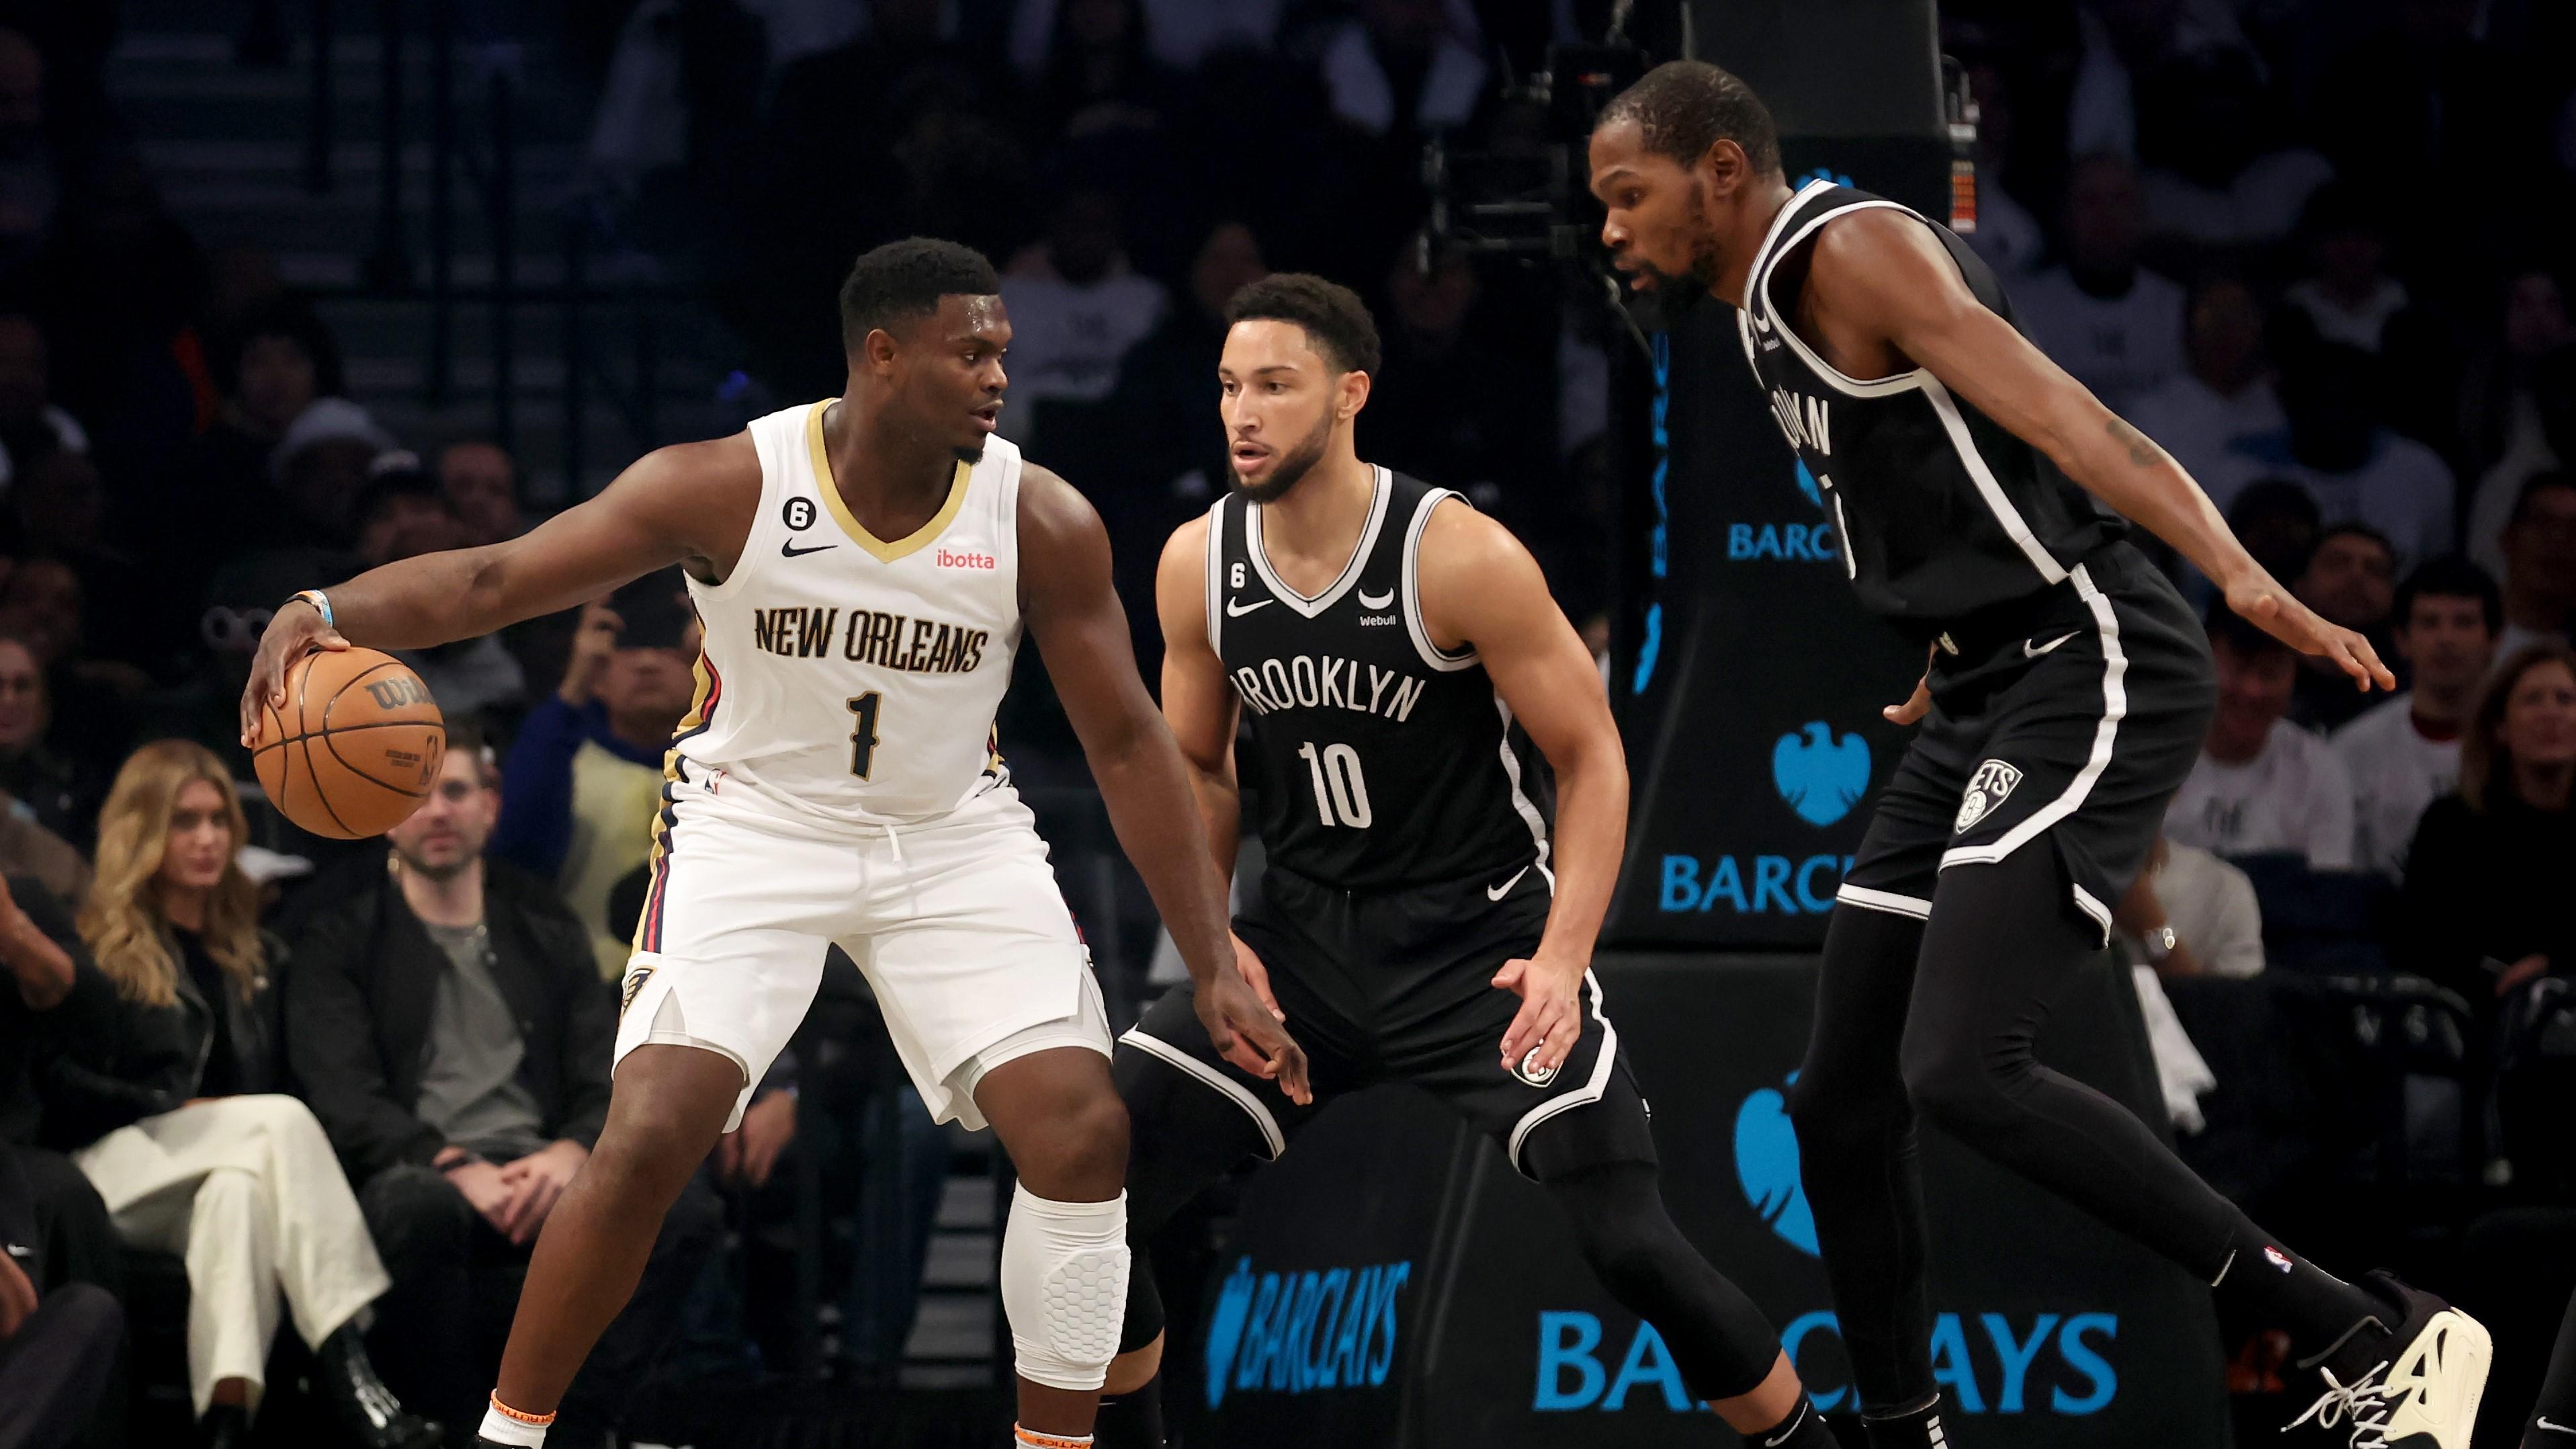 Oct 19, 2022; Brooklyn, New York, USA; New Orleans Pelicans forward Zion Williamson (1) controls the ball against Brooklyn Nets guard Ben Simmons (10) and forward Kevin Durant (7) during the first quarter at Barclays Center. Mandatory Credit: Brad Penner-USA TODAY Sports / © Brad Penner-USA TODAY Sports